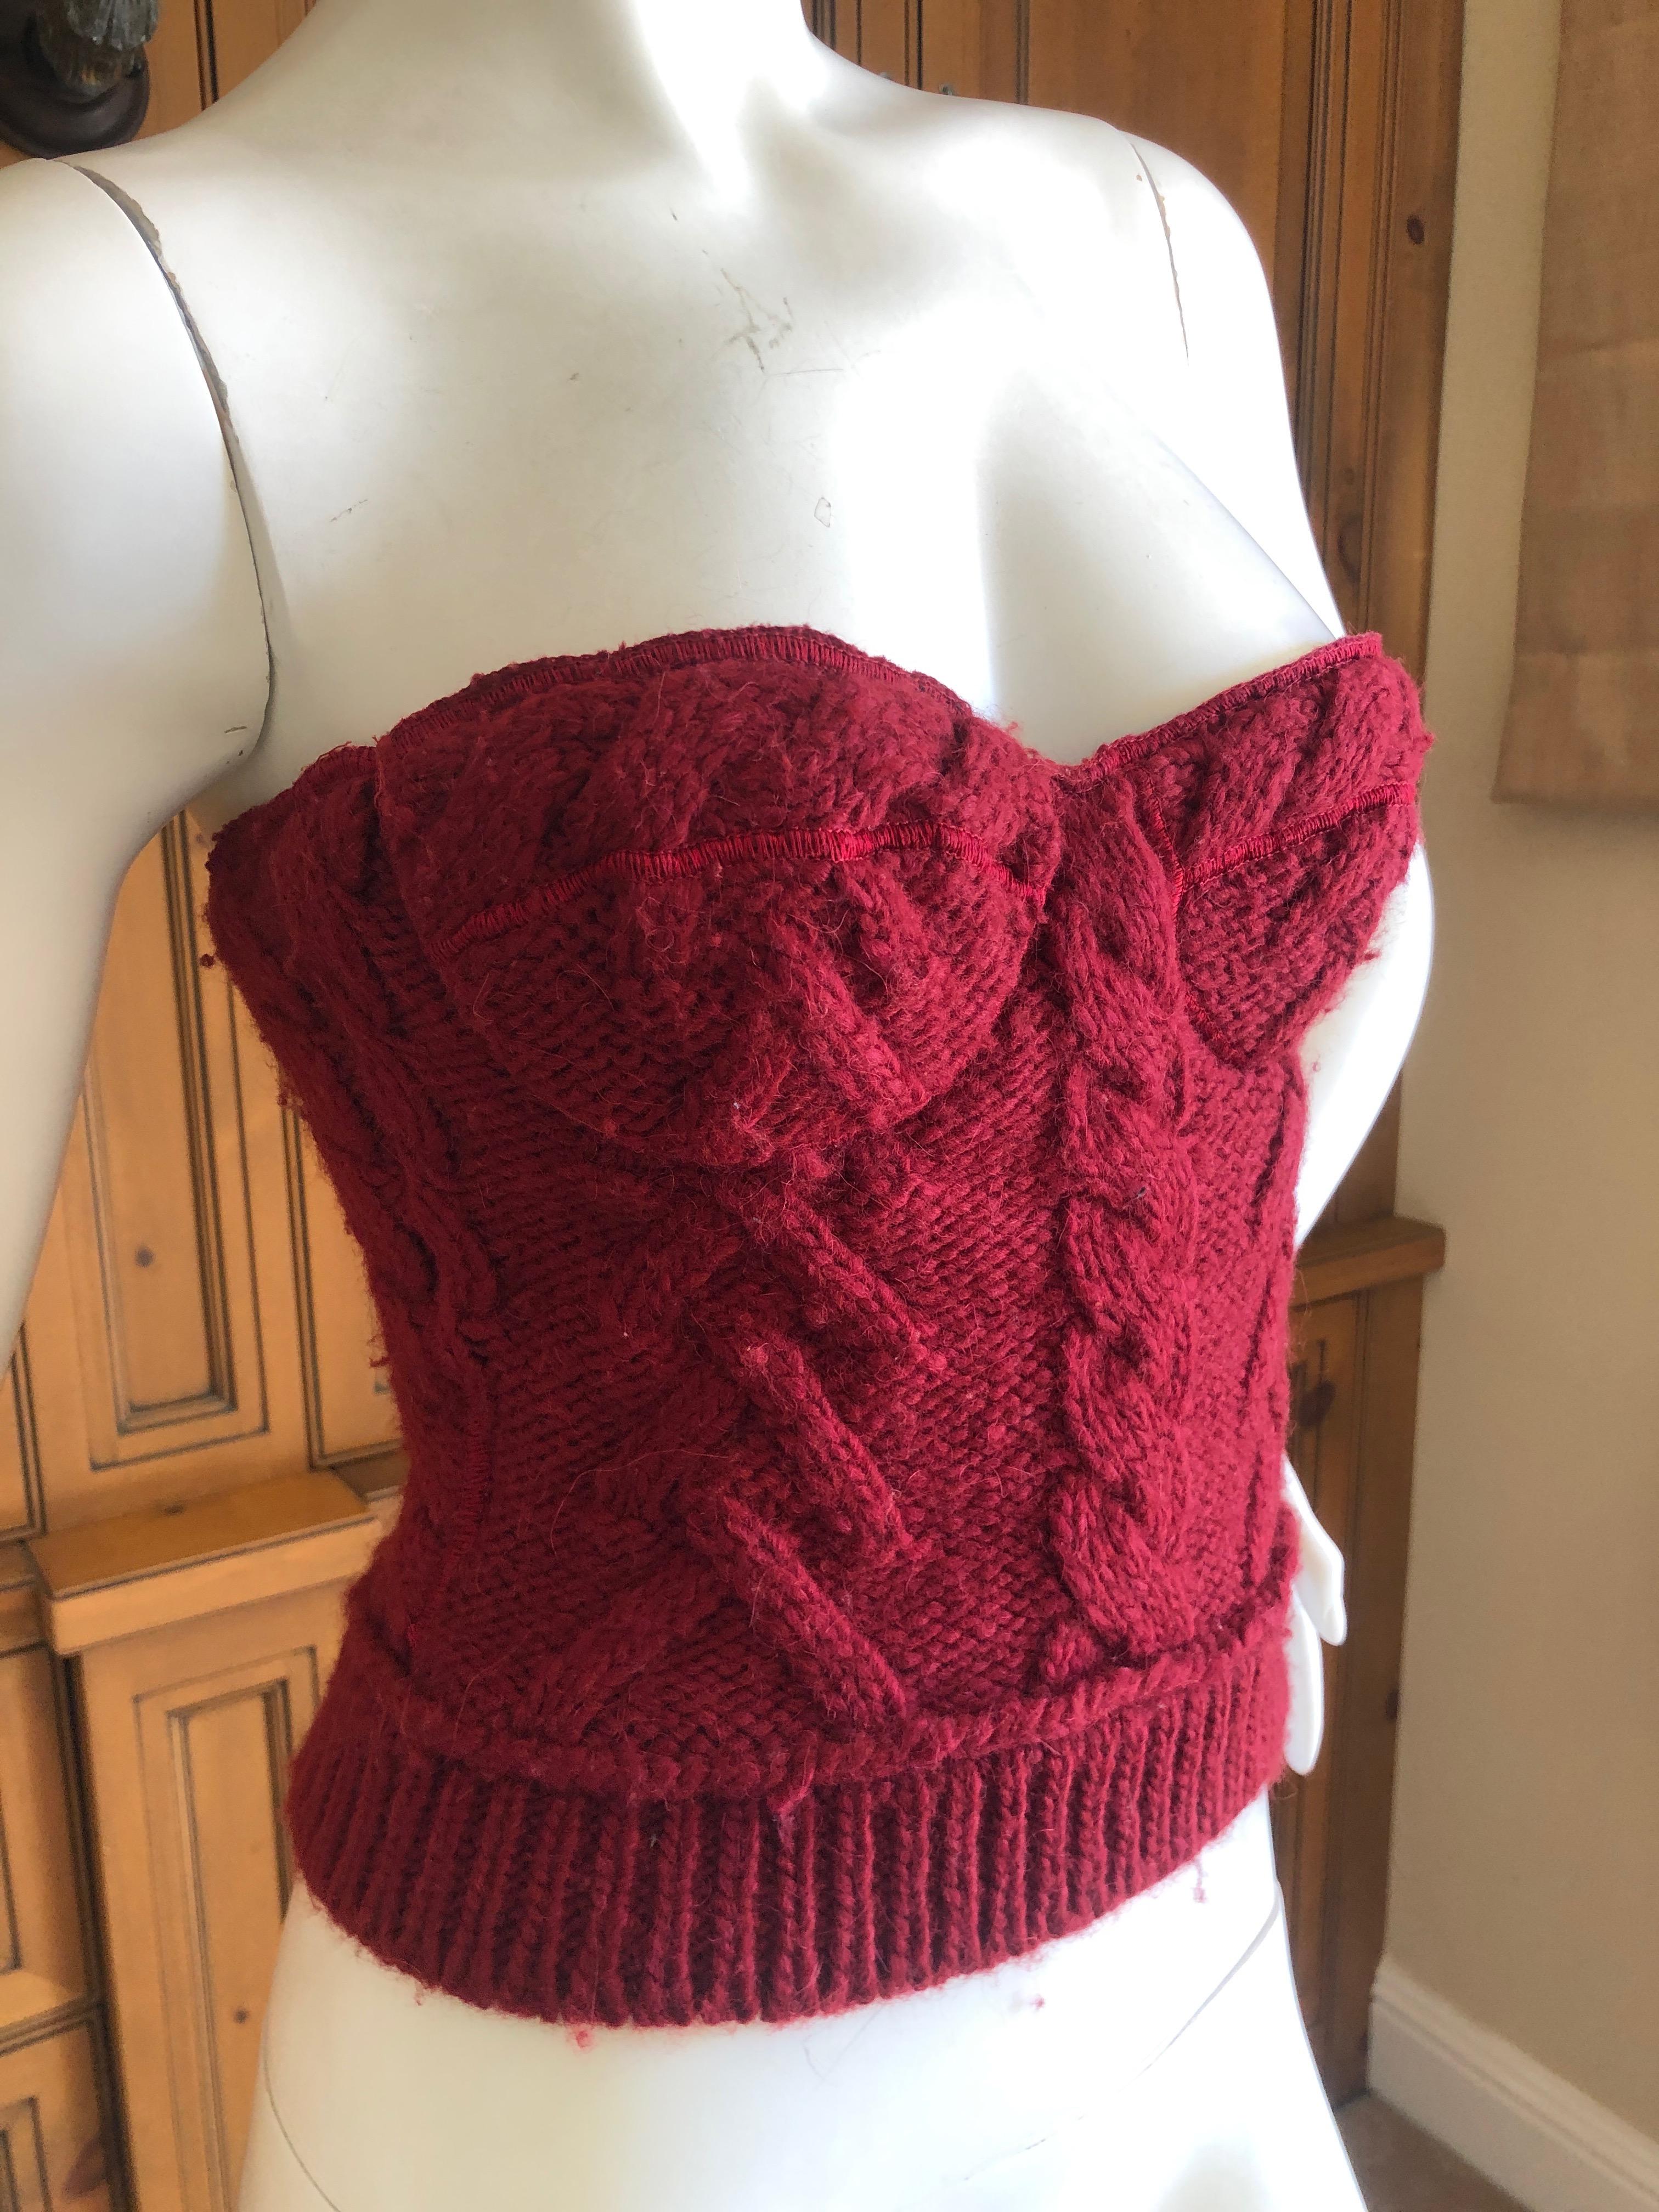 D&G Dolce & Gabbana Vintage Cable Knit Corset In Good Condition For Sale In Cloverdale, CA